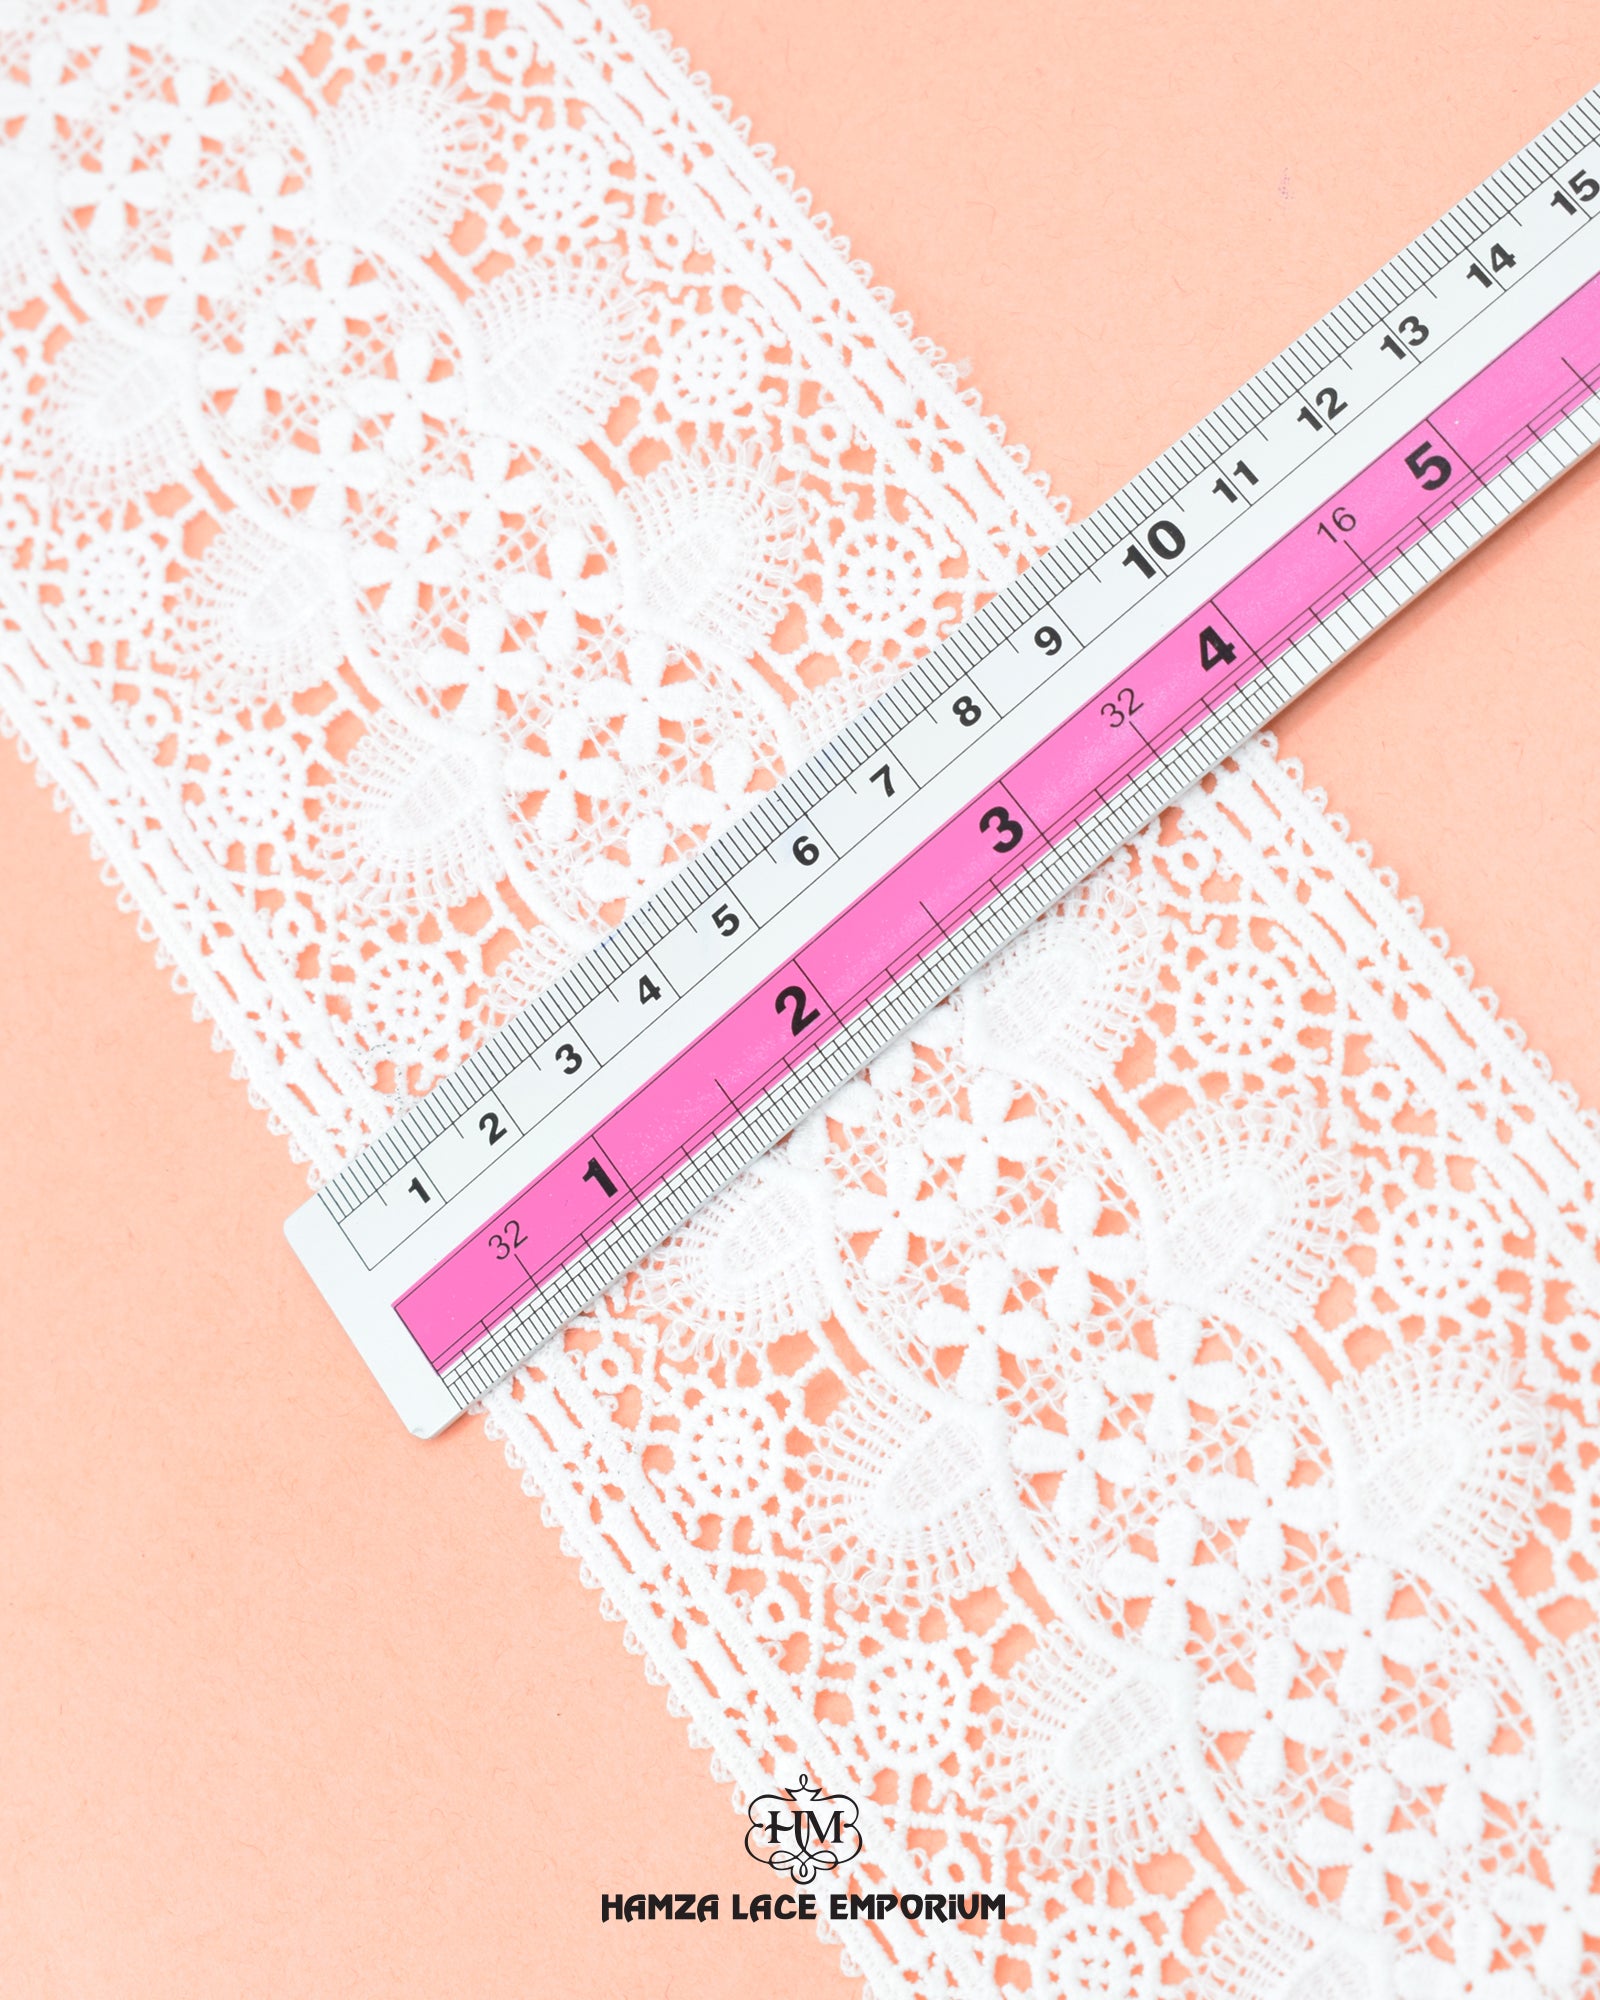 The size of the 'Center Feeling Lace 23163' is given with the help of a ruler.